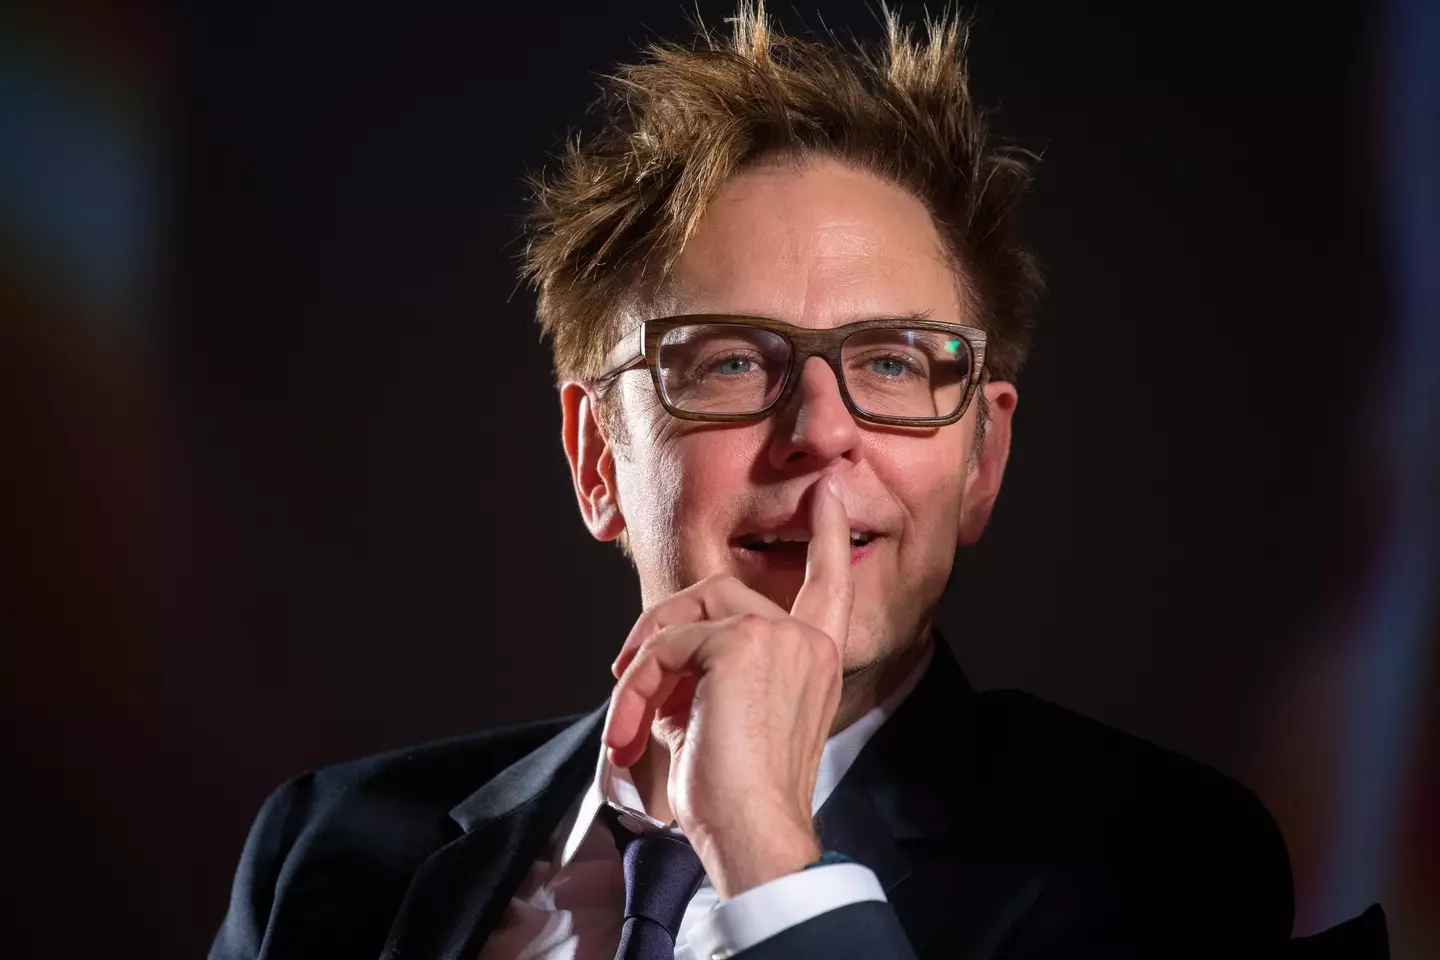 James Gunn revealed he’s written up ‘a long list’ of actors he won’t work with.